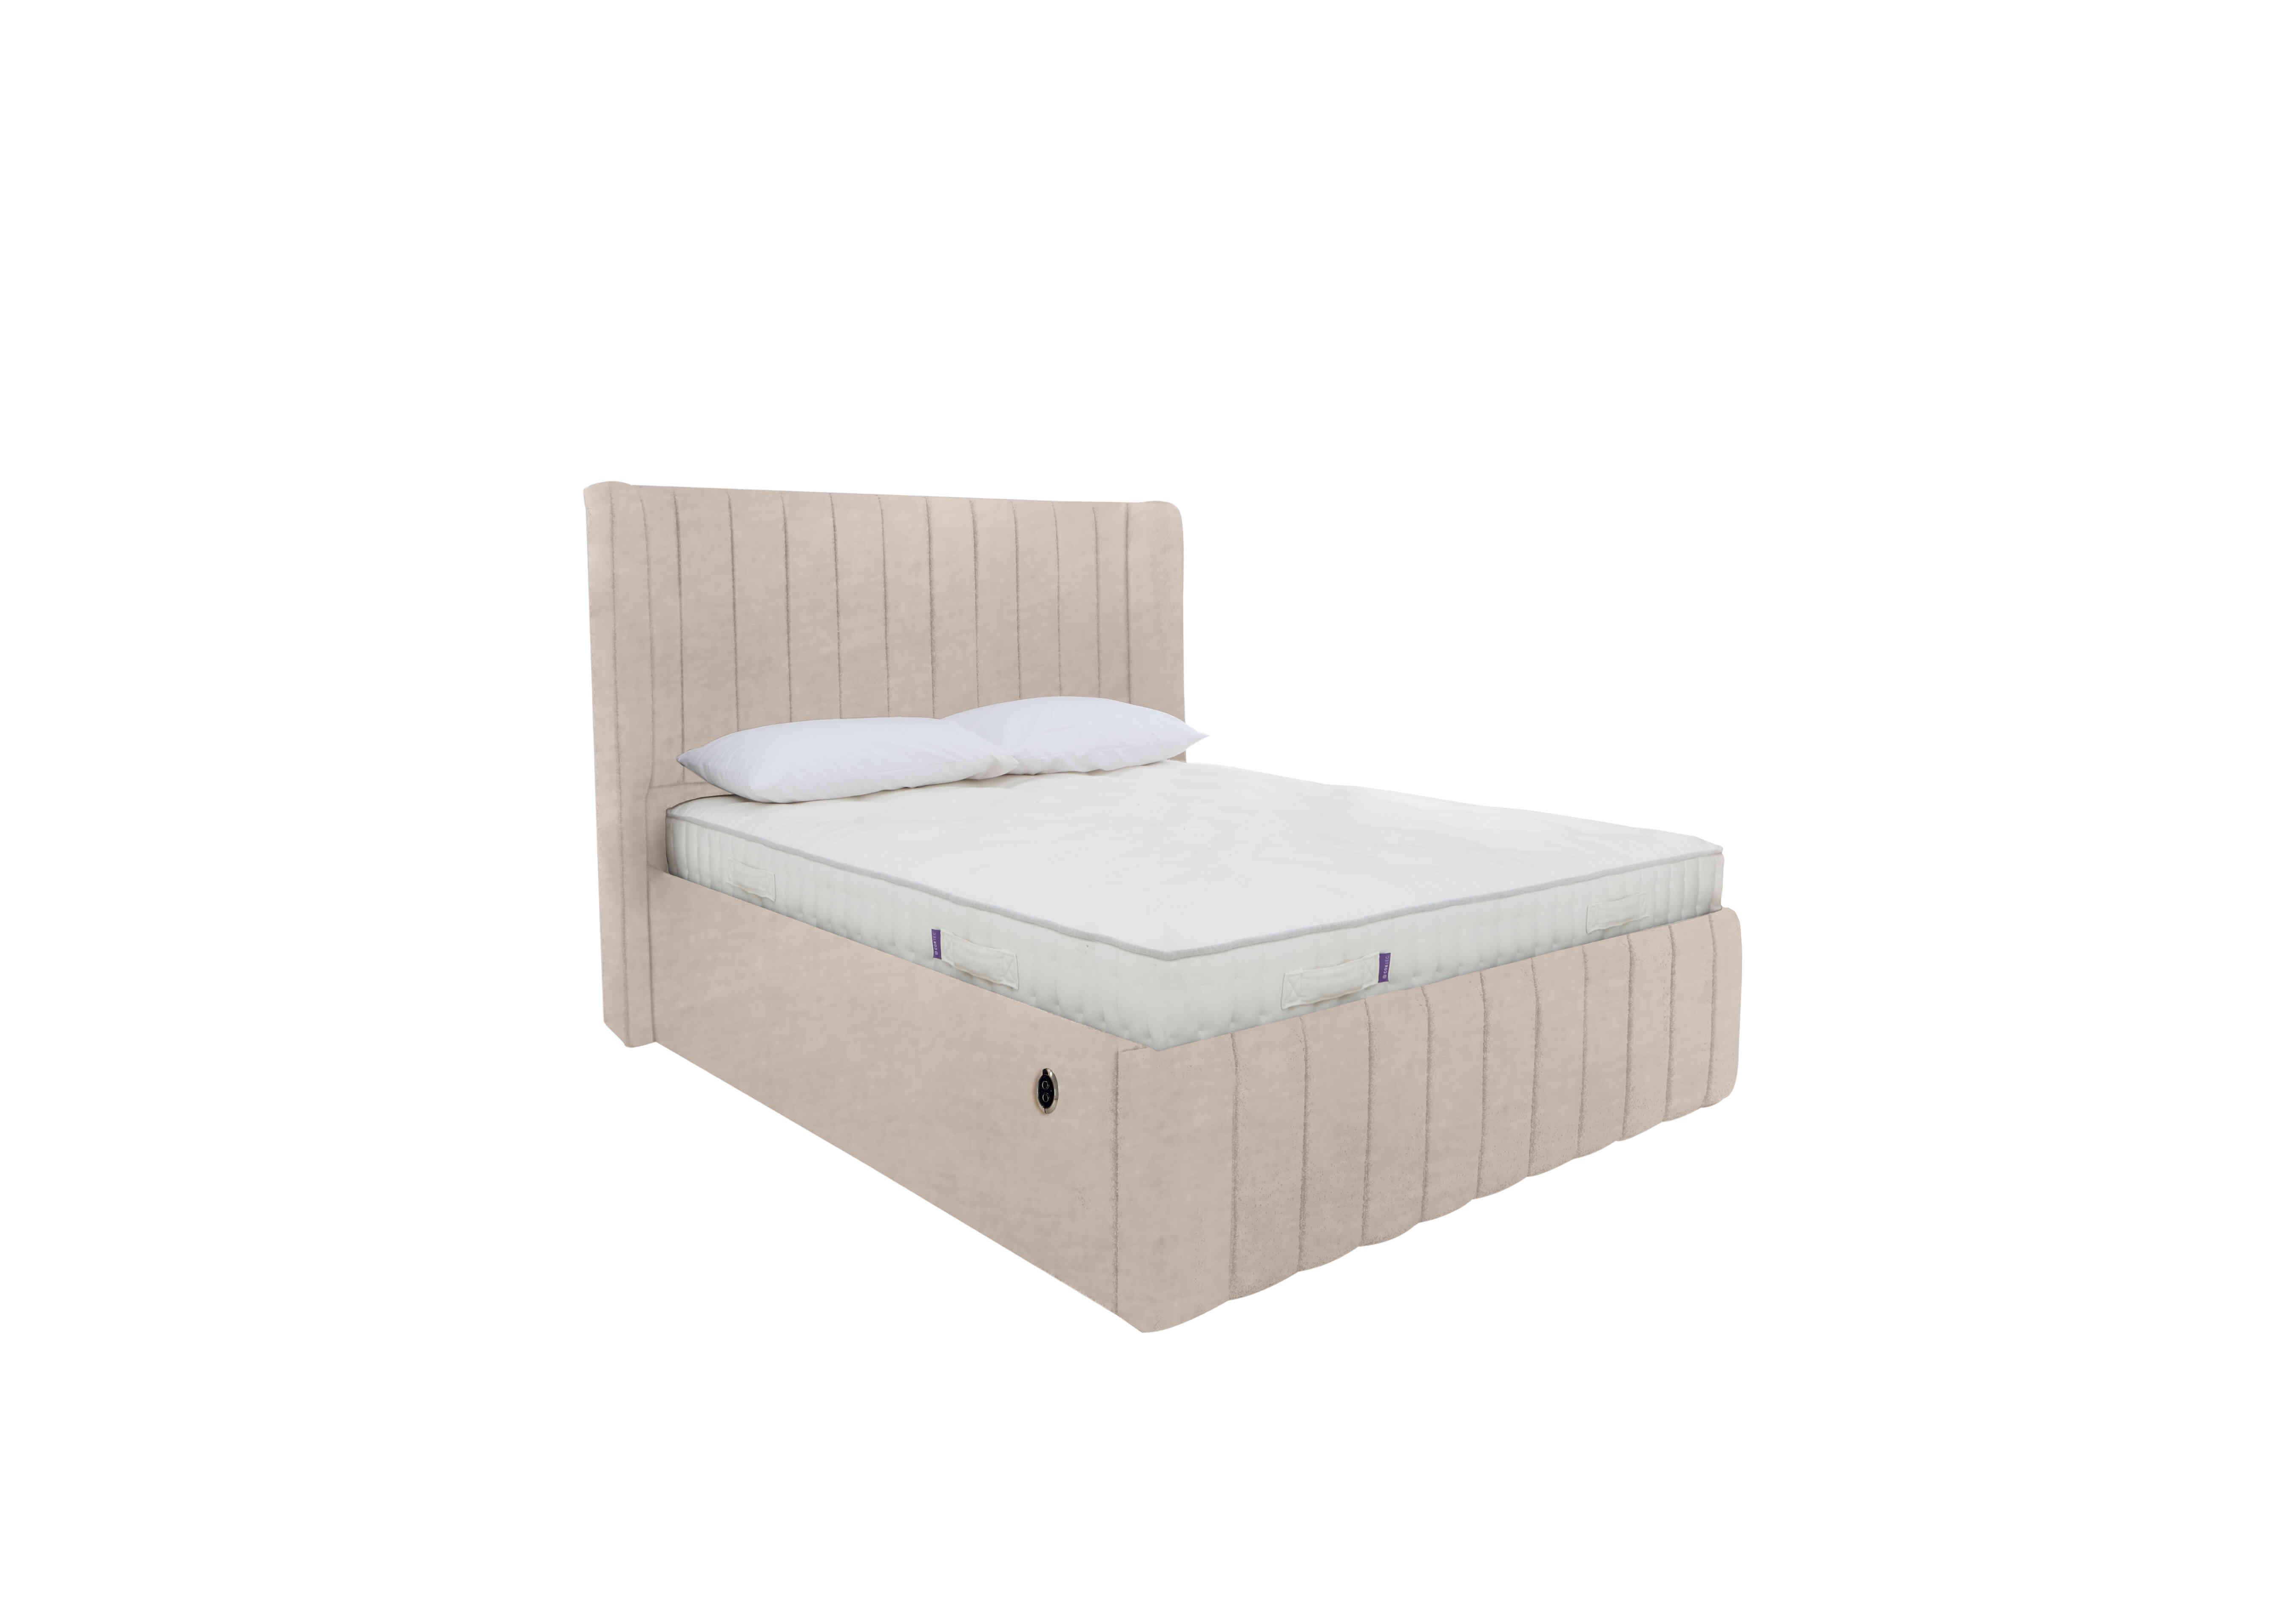 Eira Low Foot End Electric Ottoman Bed Frame in Savannah Almond on Furniture Village